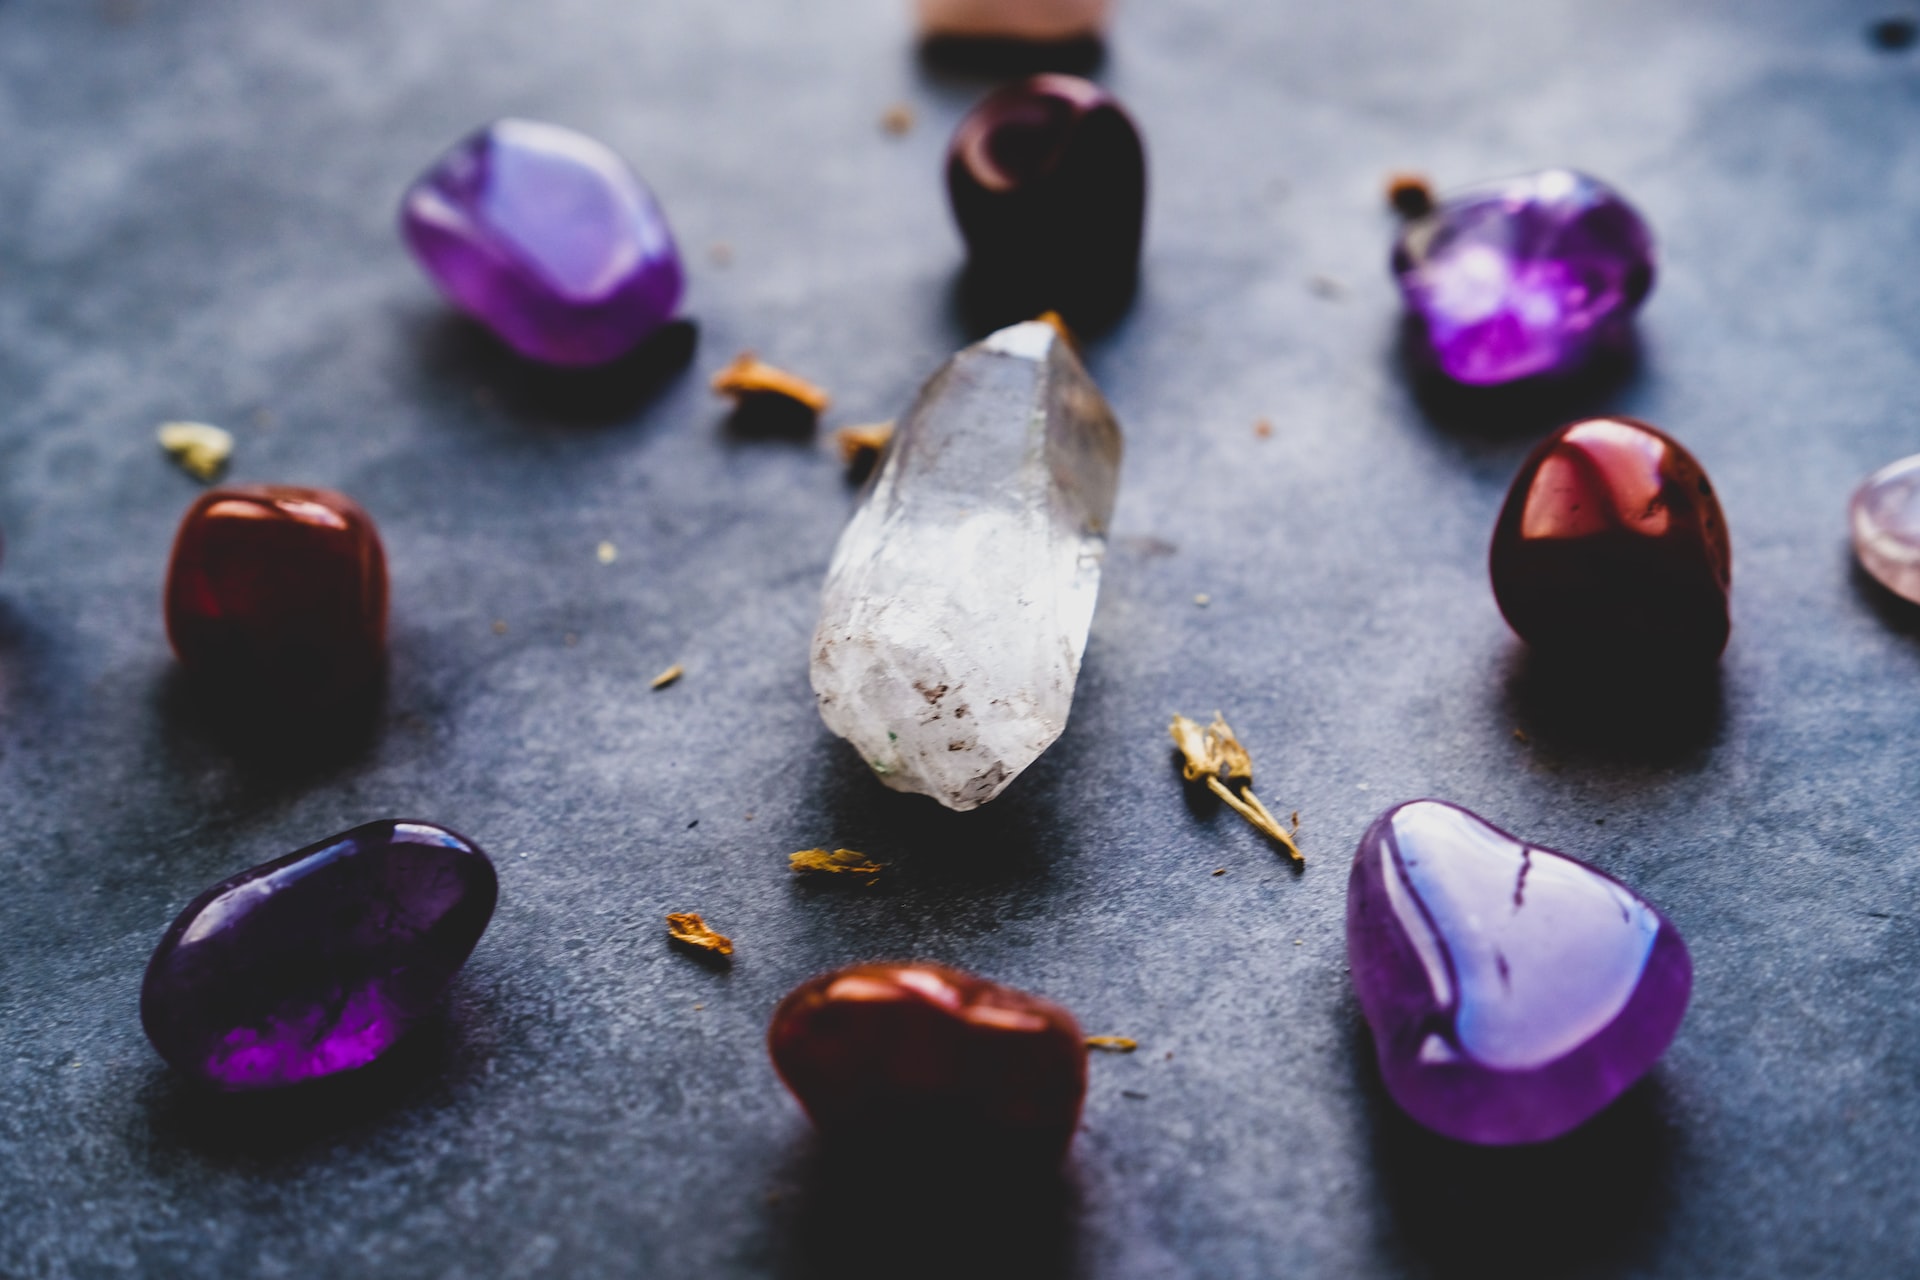 Crystal Biblical Meaning - The Importance Of Using Crystals For Spiritual Purposes